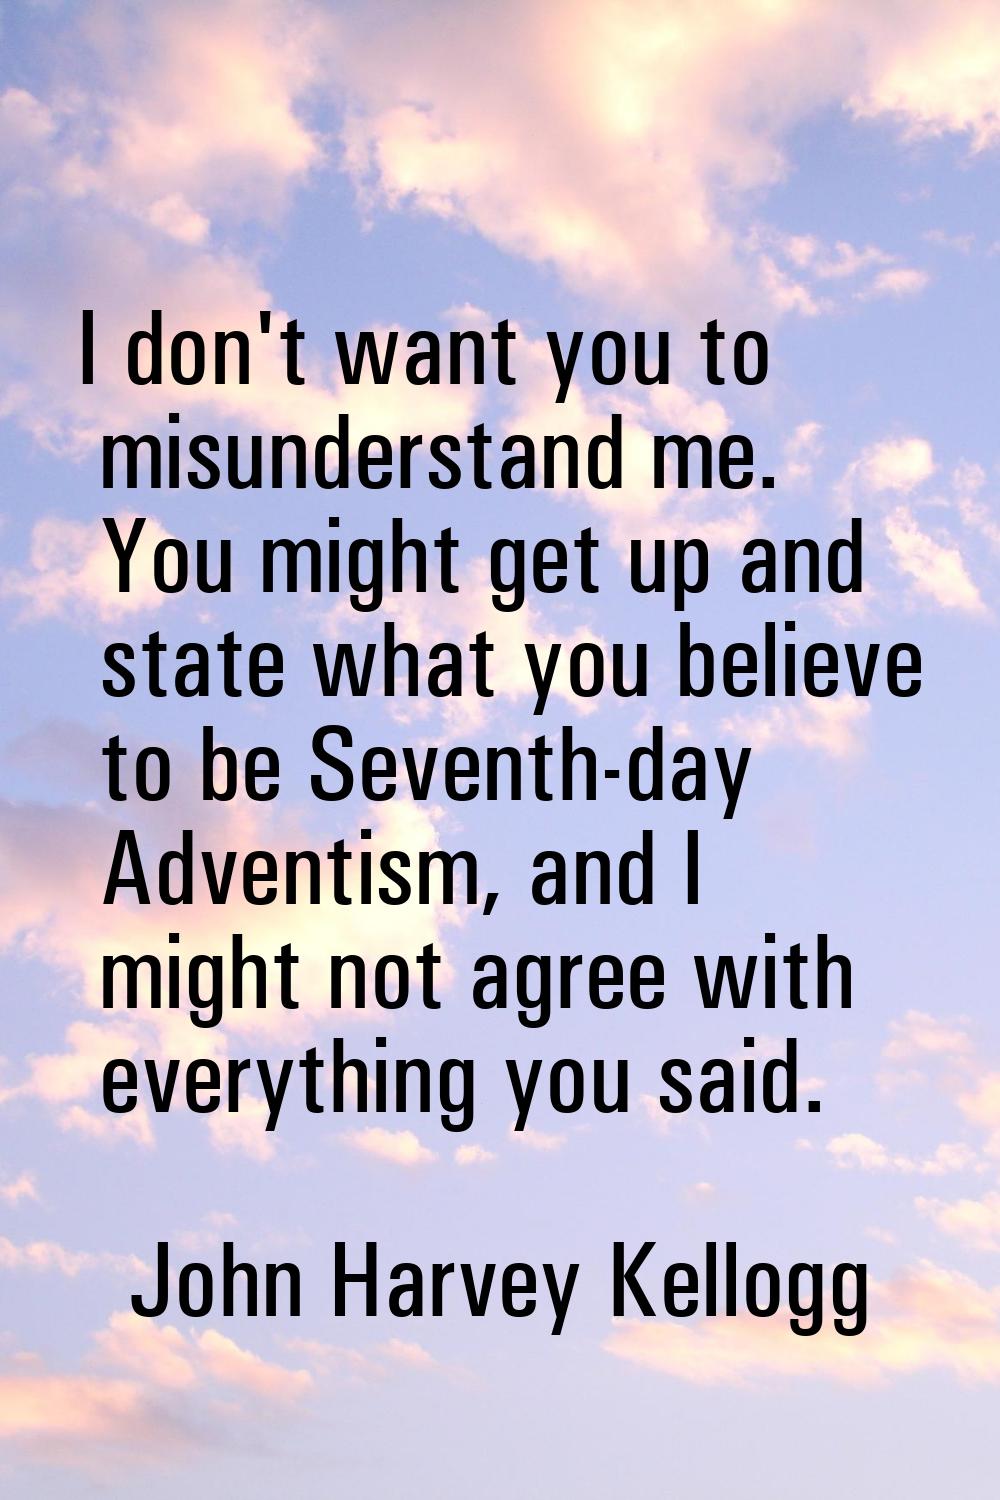 I don't want you to misunderstand me. You might get up and state what you believe to be Seventh-day